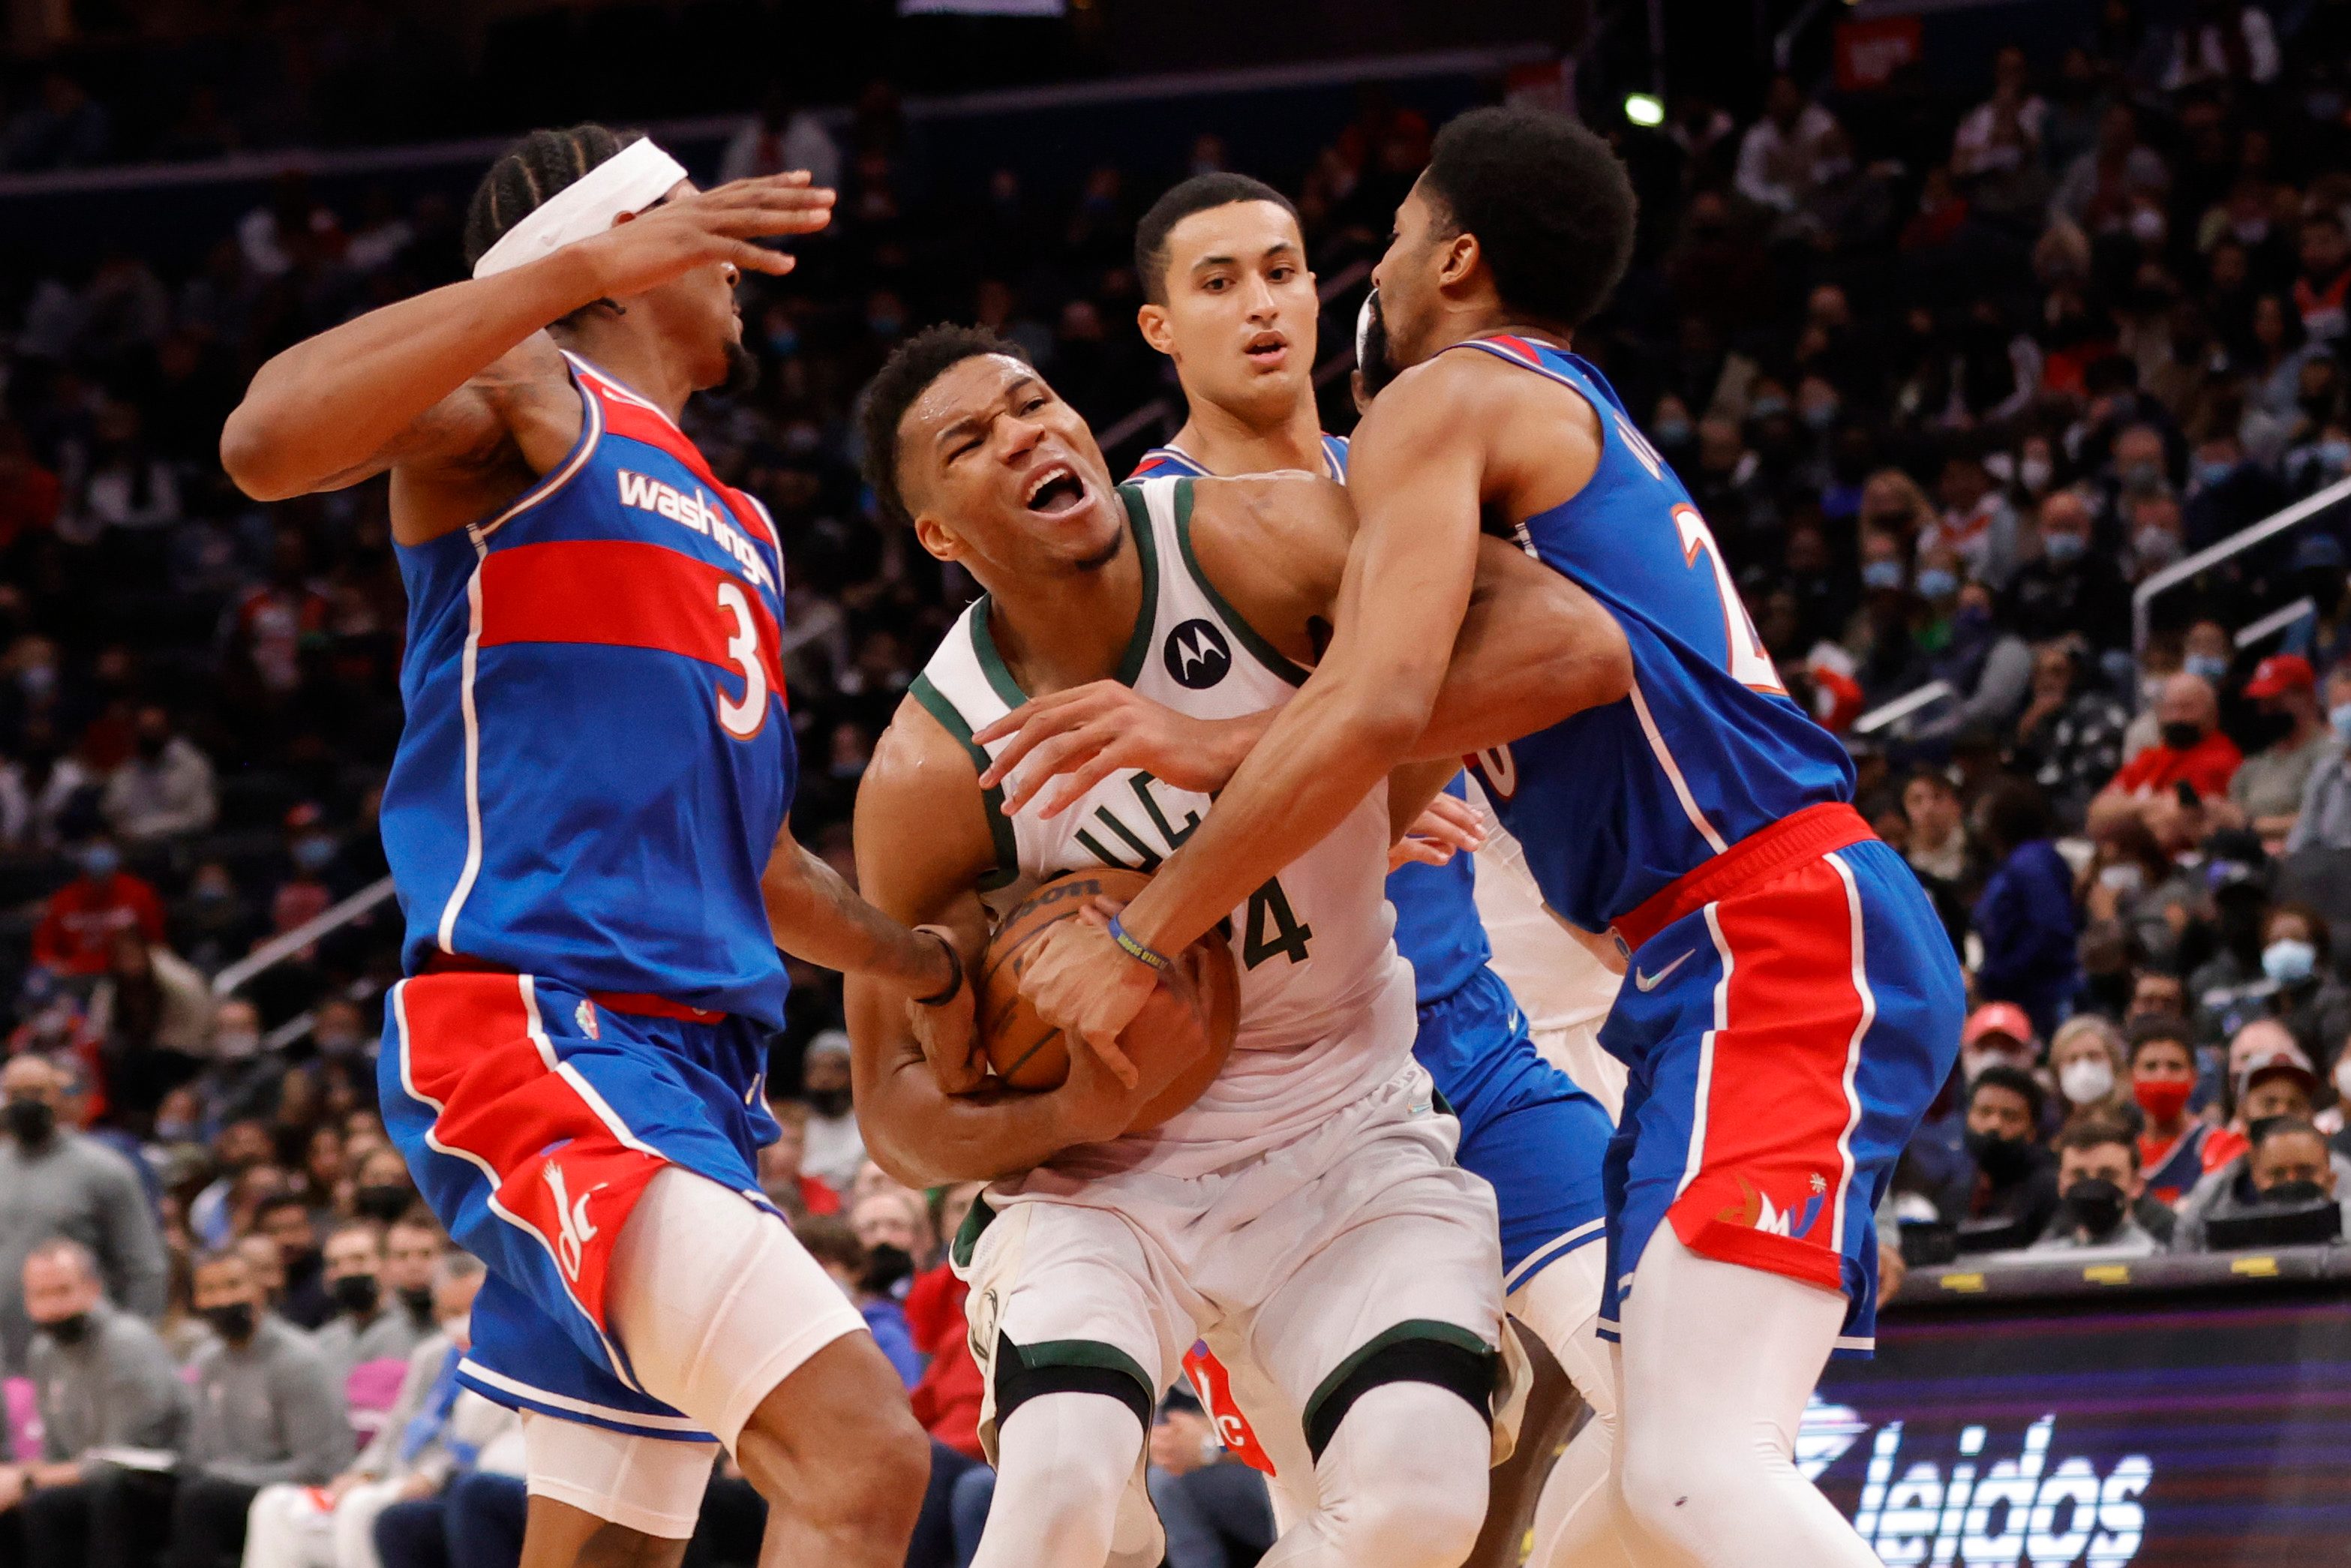 Beal, Wizards send NBA champion Bucks to 5th loss in 6 games